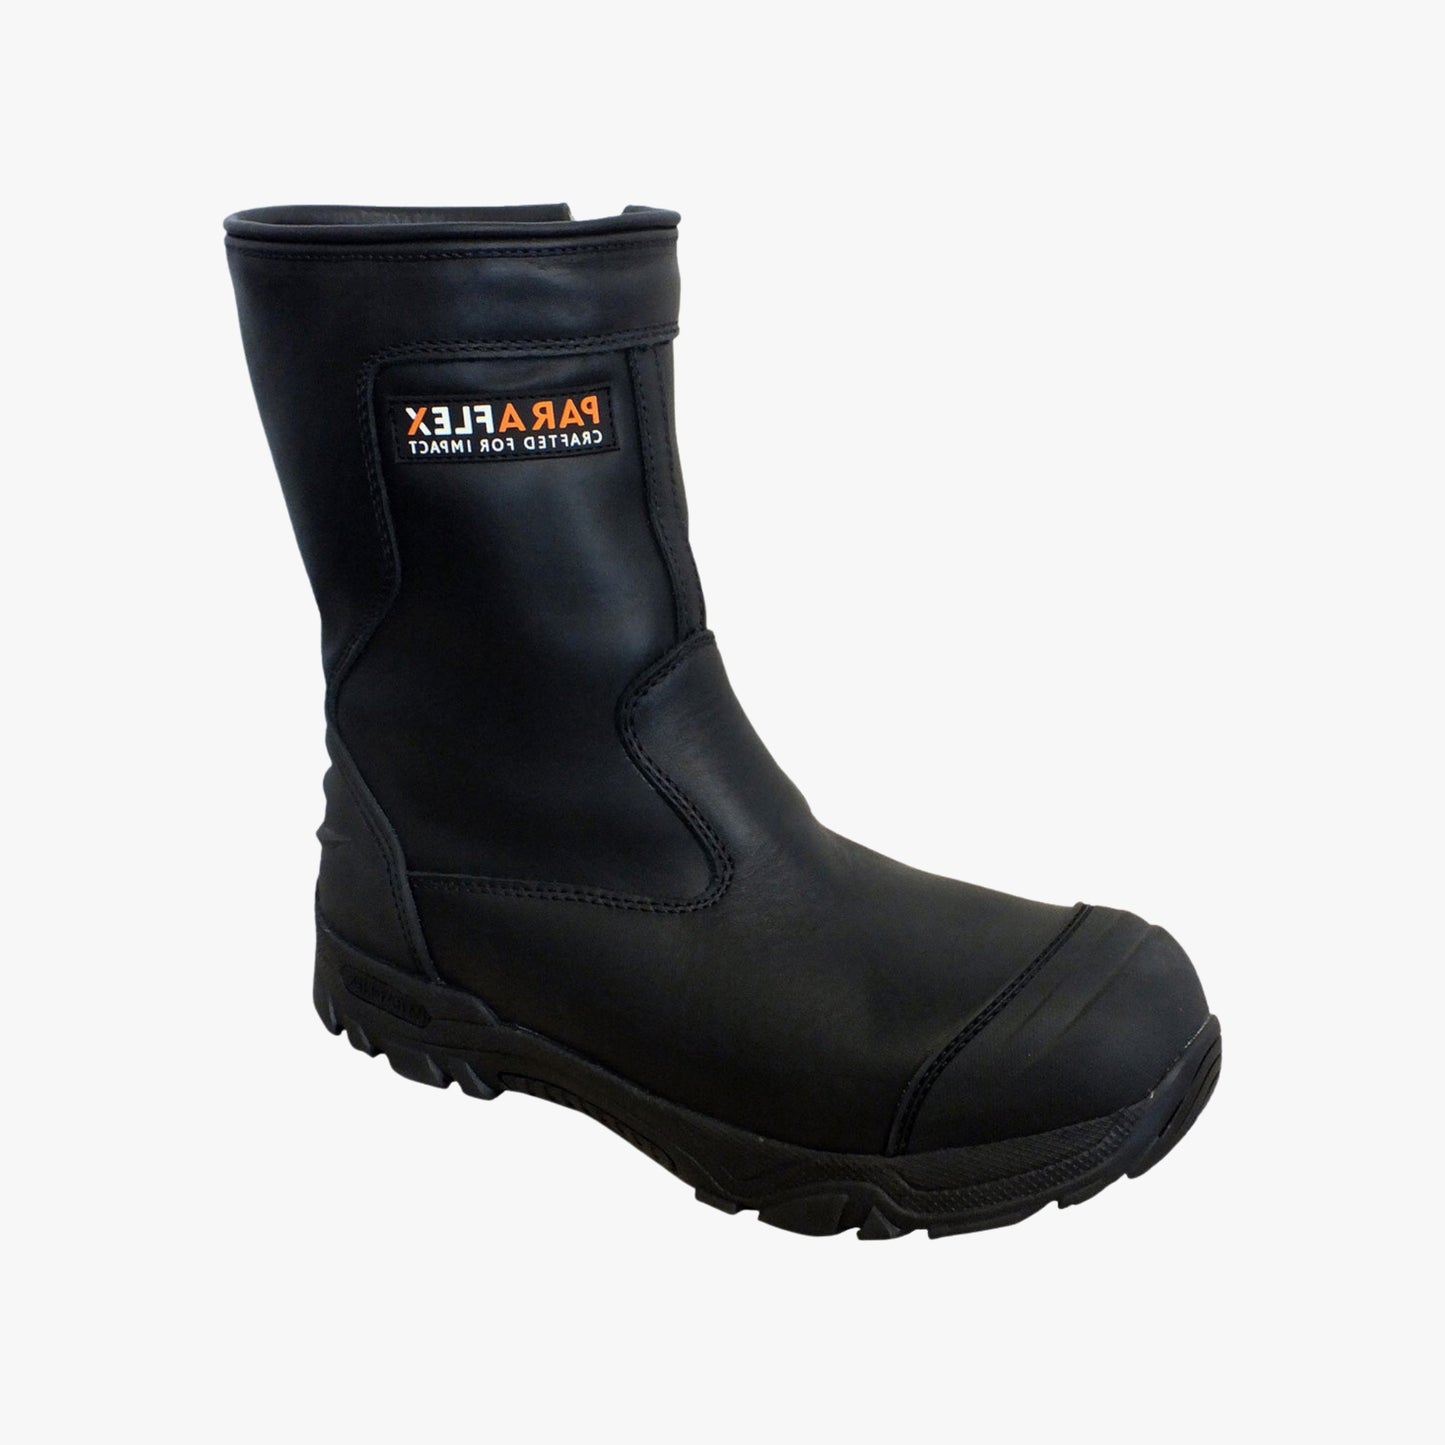 THERMO 2020 - High Leg Side Zip Freezer Safety Boot